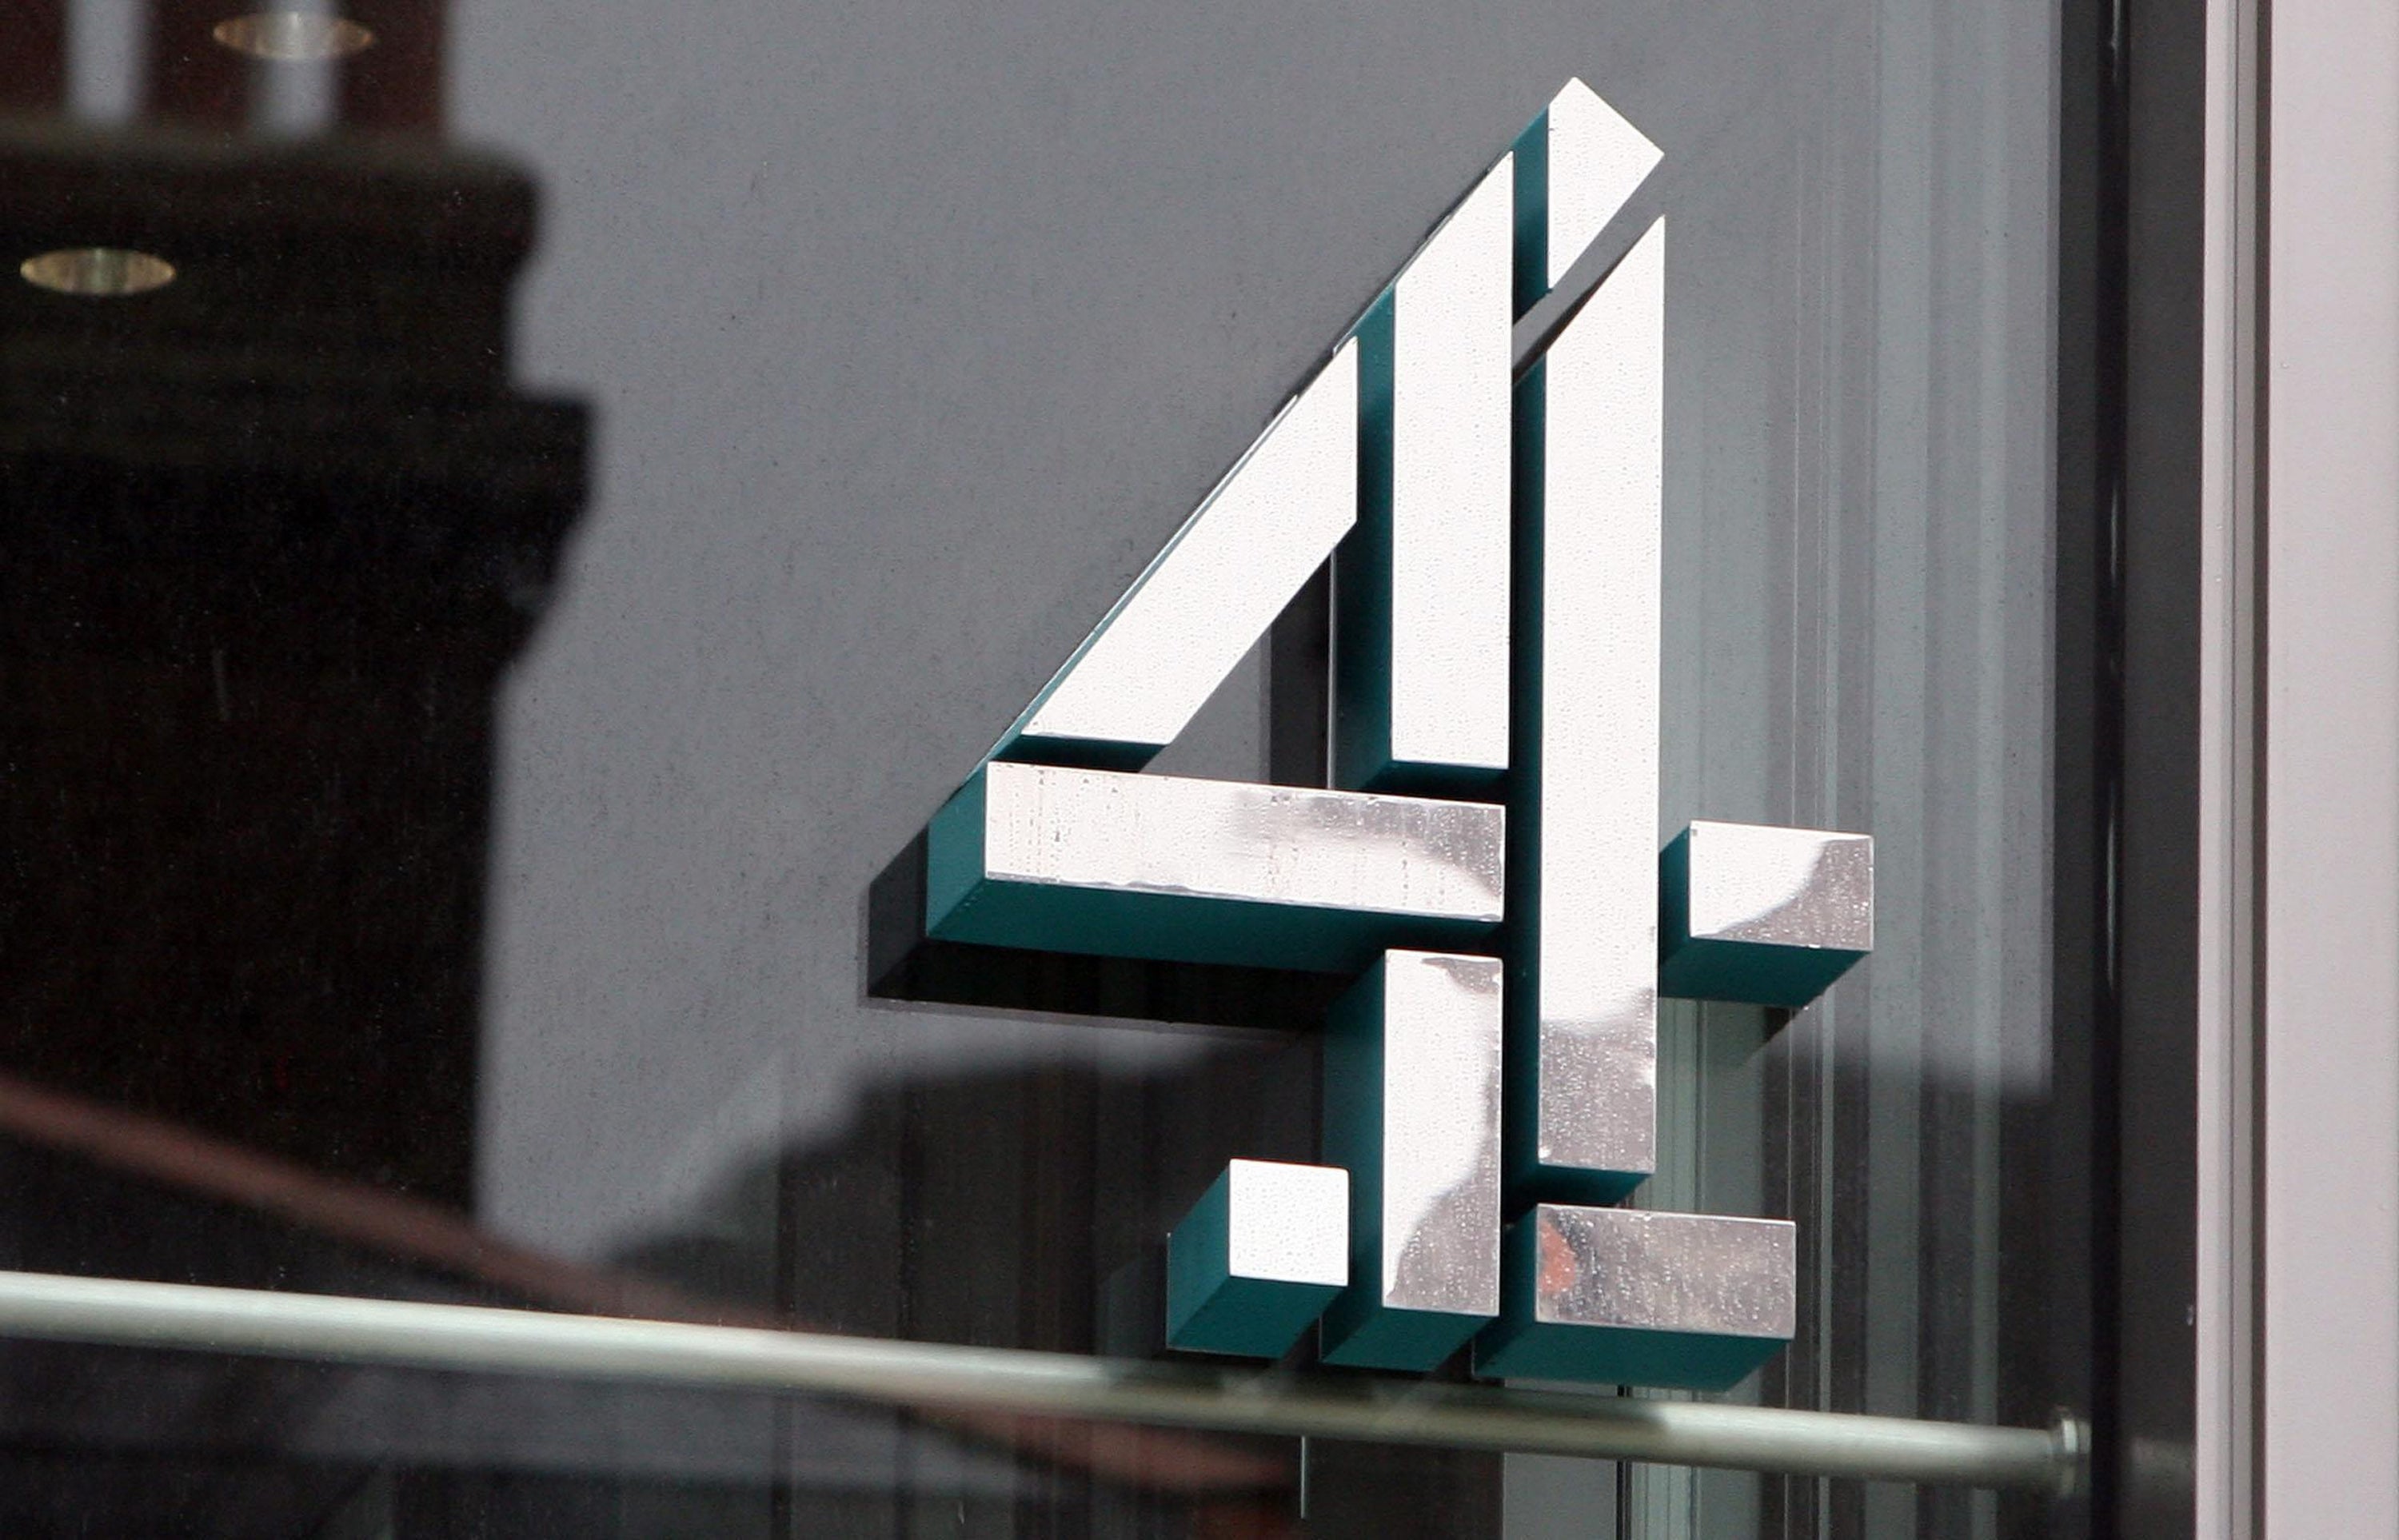 Lord Parkinson has defended the Government’s decision to privatise Channel 4 (Lewis Whyld/PA)